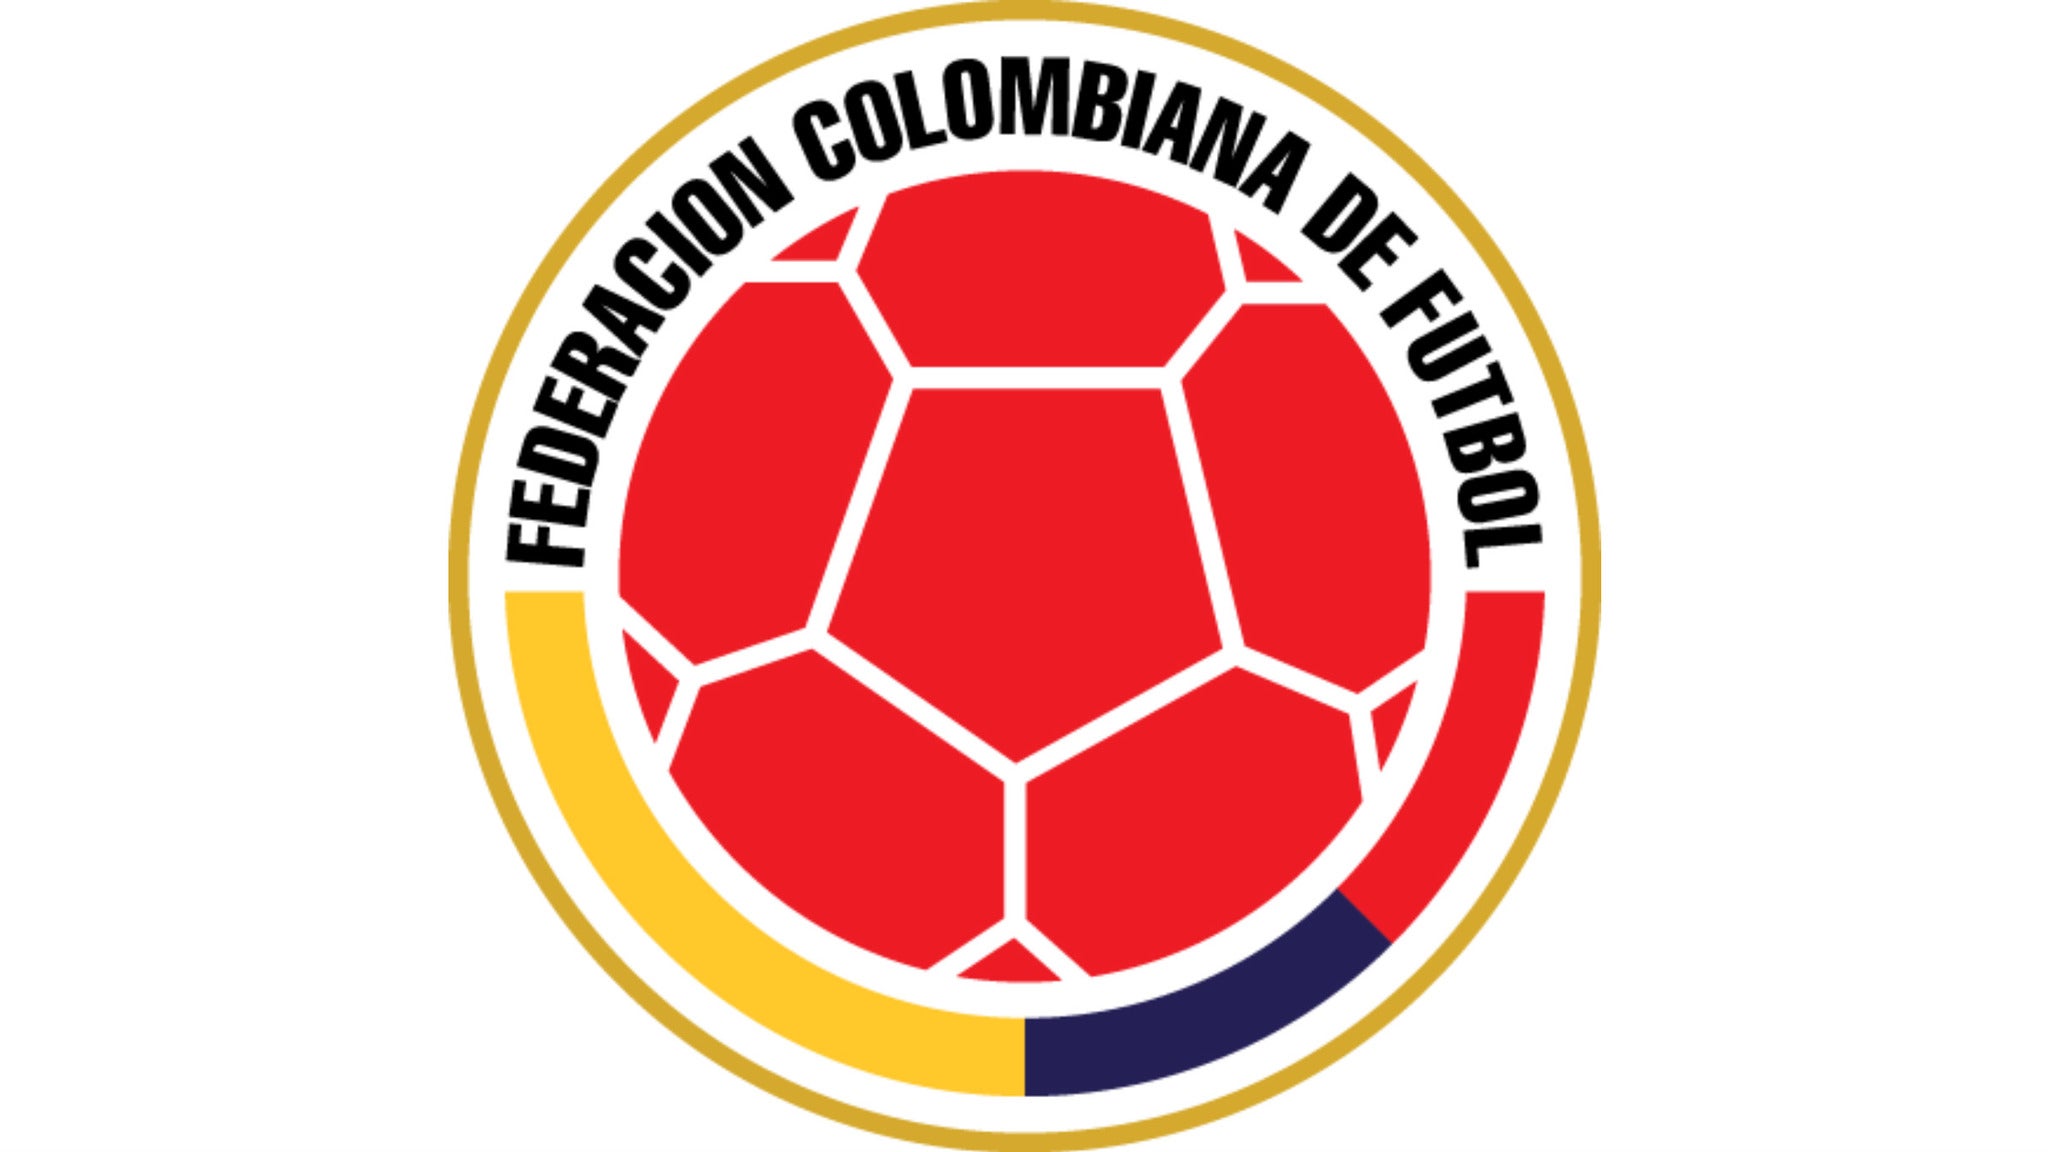 Colombia vs. Paraguay in Fort Lauderdale promo photo for Exclusive presale offer code